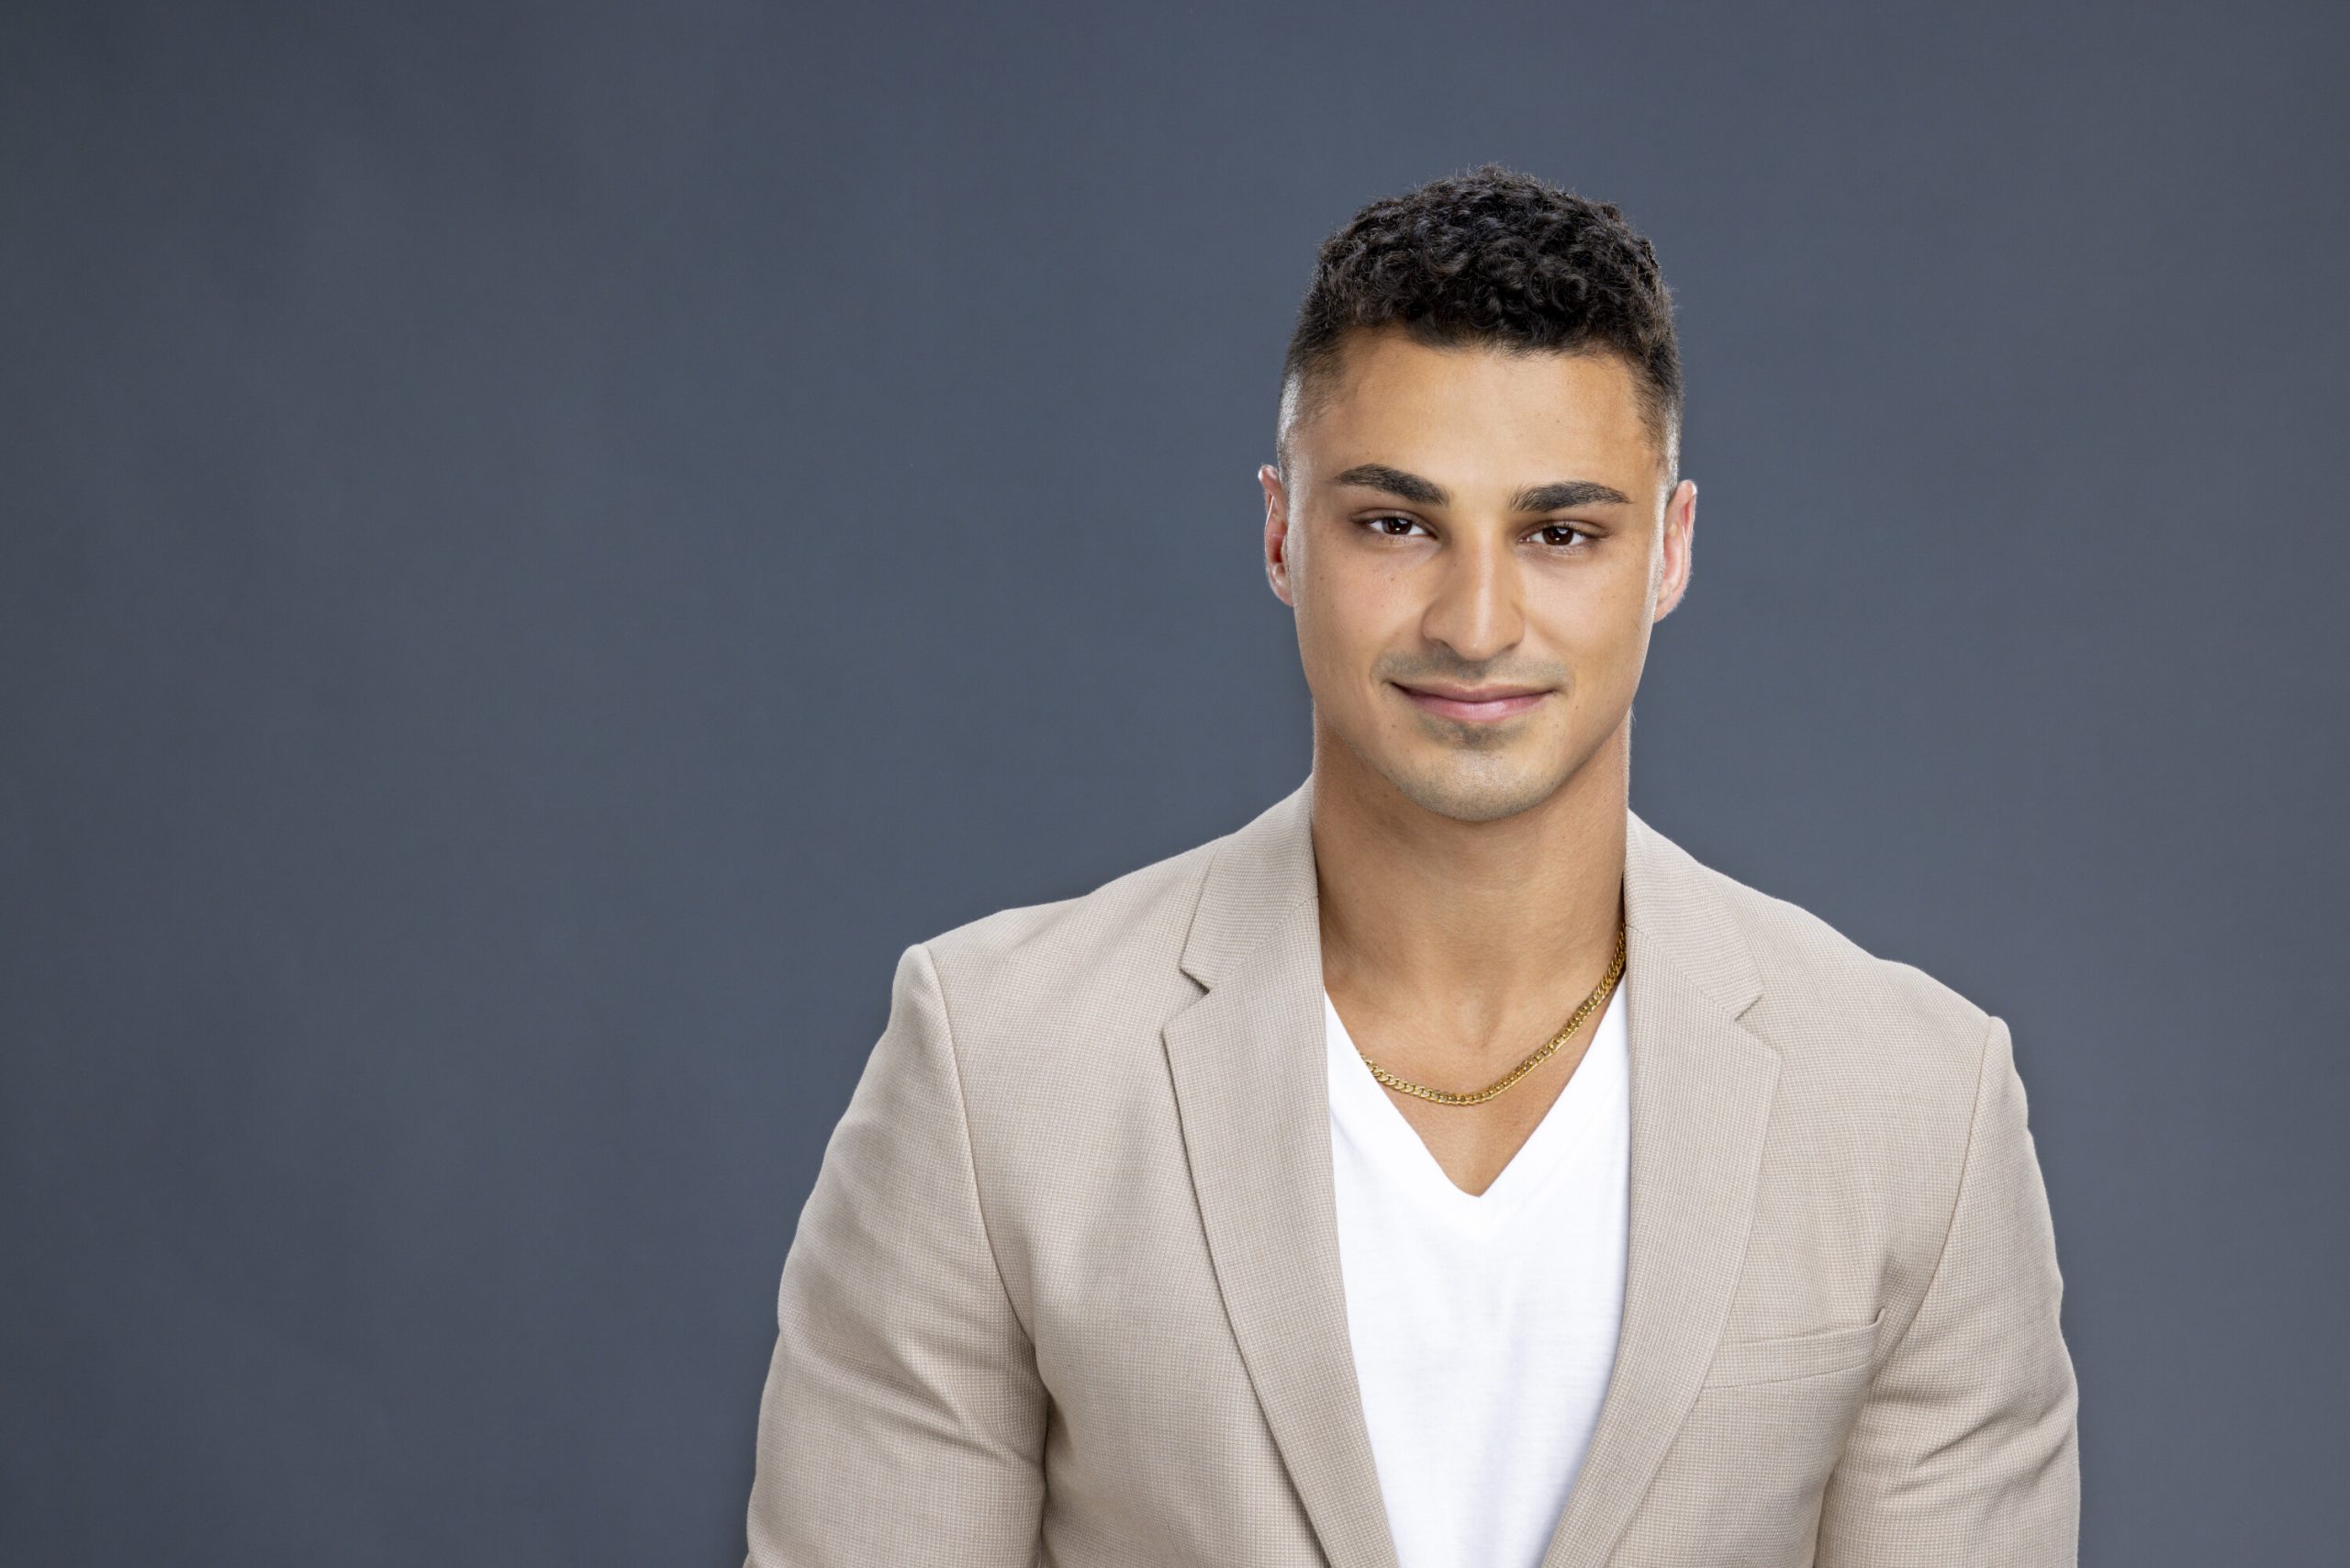 Joseph Abdin, who replaced Marvin in 'Big Brother' Season 24, wears